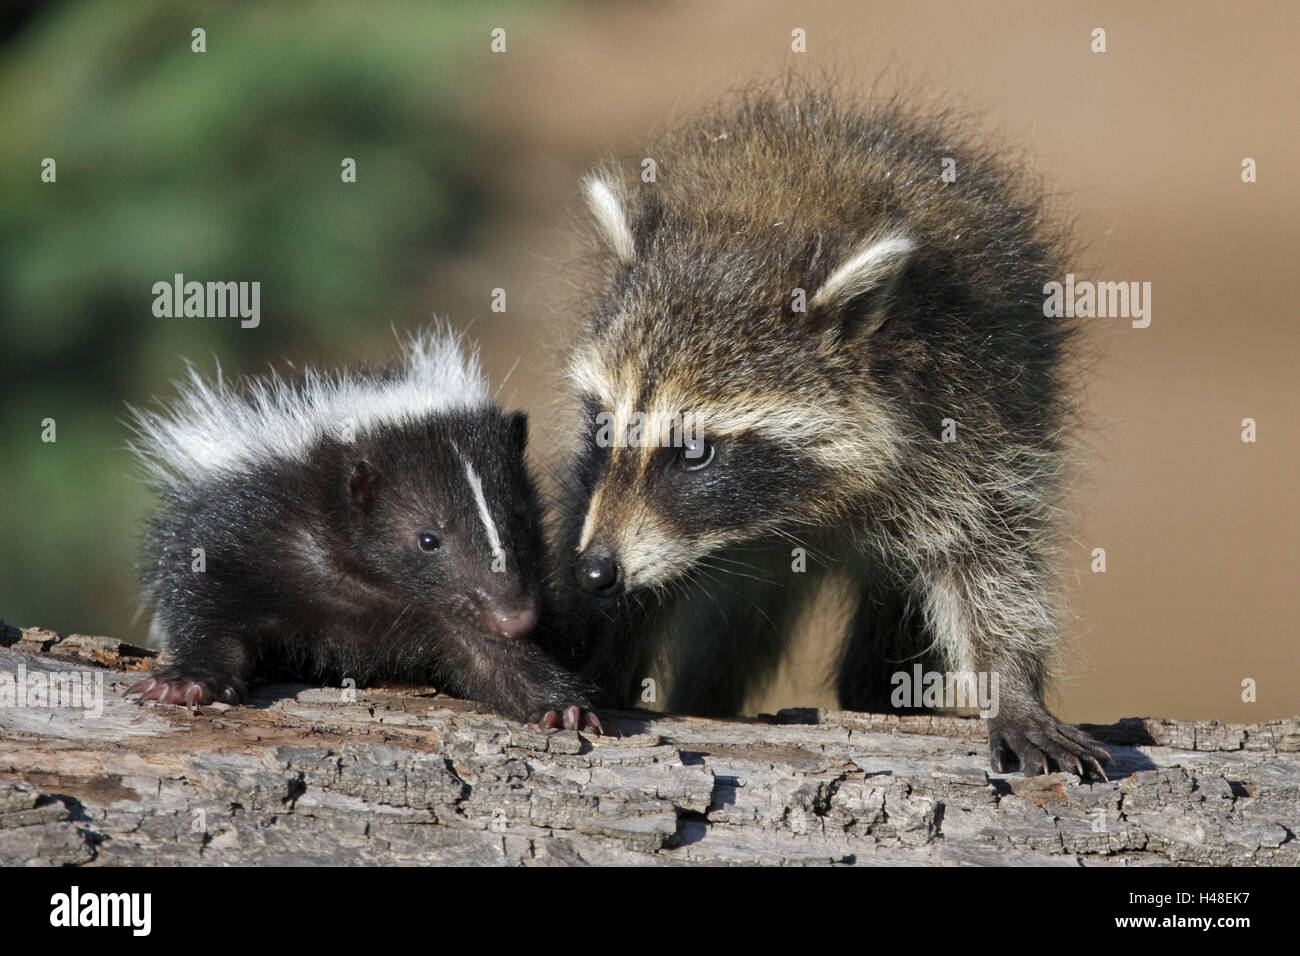 Racoon, Procyon lotor, skunk, Mephitis mephitis, young animals, trunk, Stock Photo